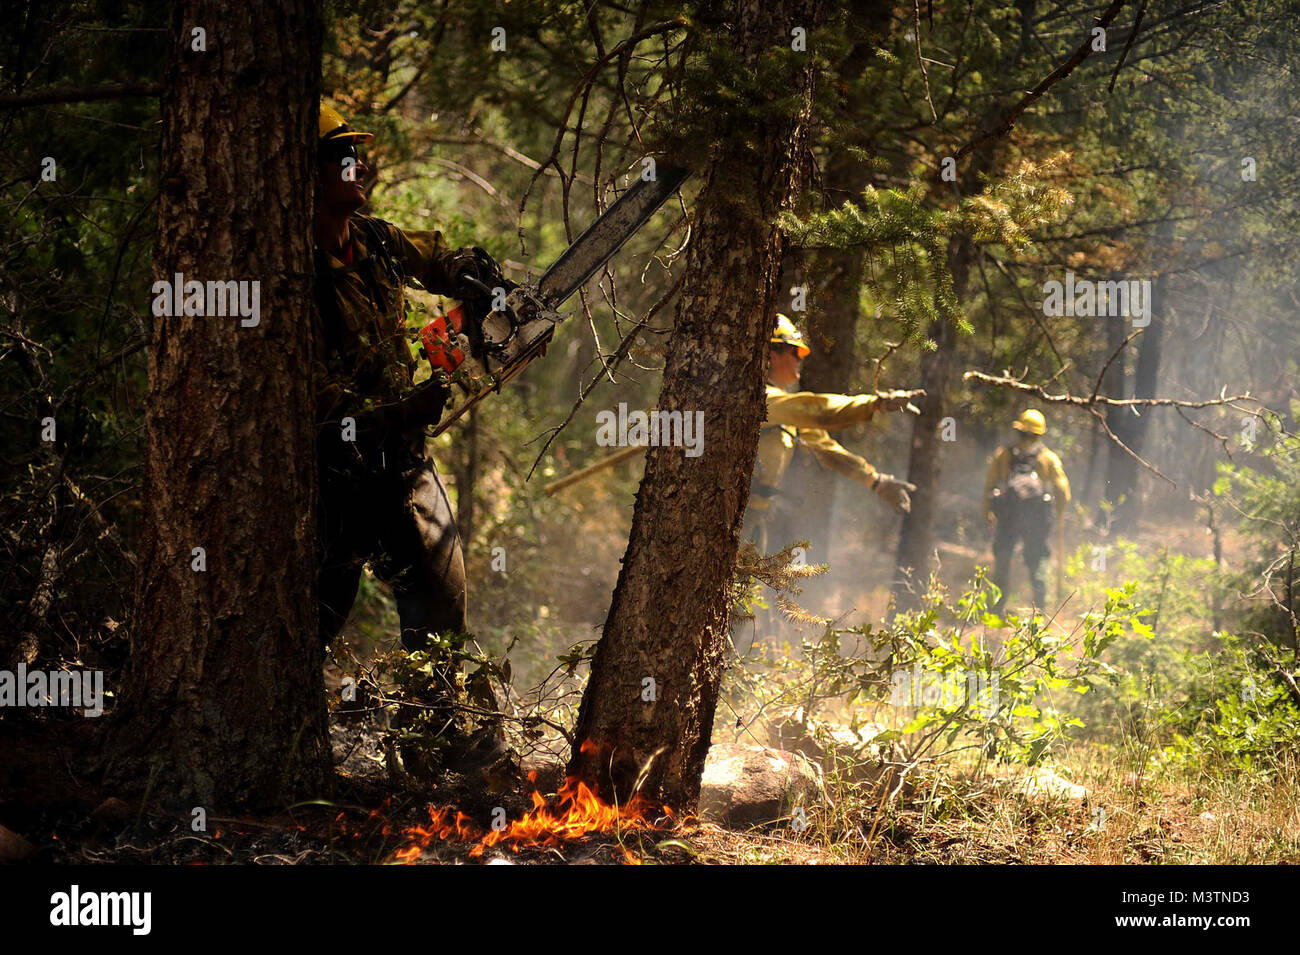 Vandenberg Air Force Base Hot Shot fire fighter Brad Mabery cuts a tree with his chainsaw while cutting and clearing a fire line on June 28, 2012 in the Mount Saint Francois area of Colorado Springs, Co. His team is helping to battle several fires in Waldo Canyon.  The Waldo Canyon fire has grown to 18,500 acres and burned over 300 homes. Currently, more than 90 firefighters from the Academy, along with assets from Air Force Space Command; F.E. Warren Air Force Base, Wyo.; Fort Carson, Colo.; and the local community continue to fight the Waldo Canyon fire.(U.S. Air Force Photo by: Master Sgt.  Stock Photo